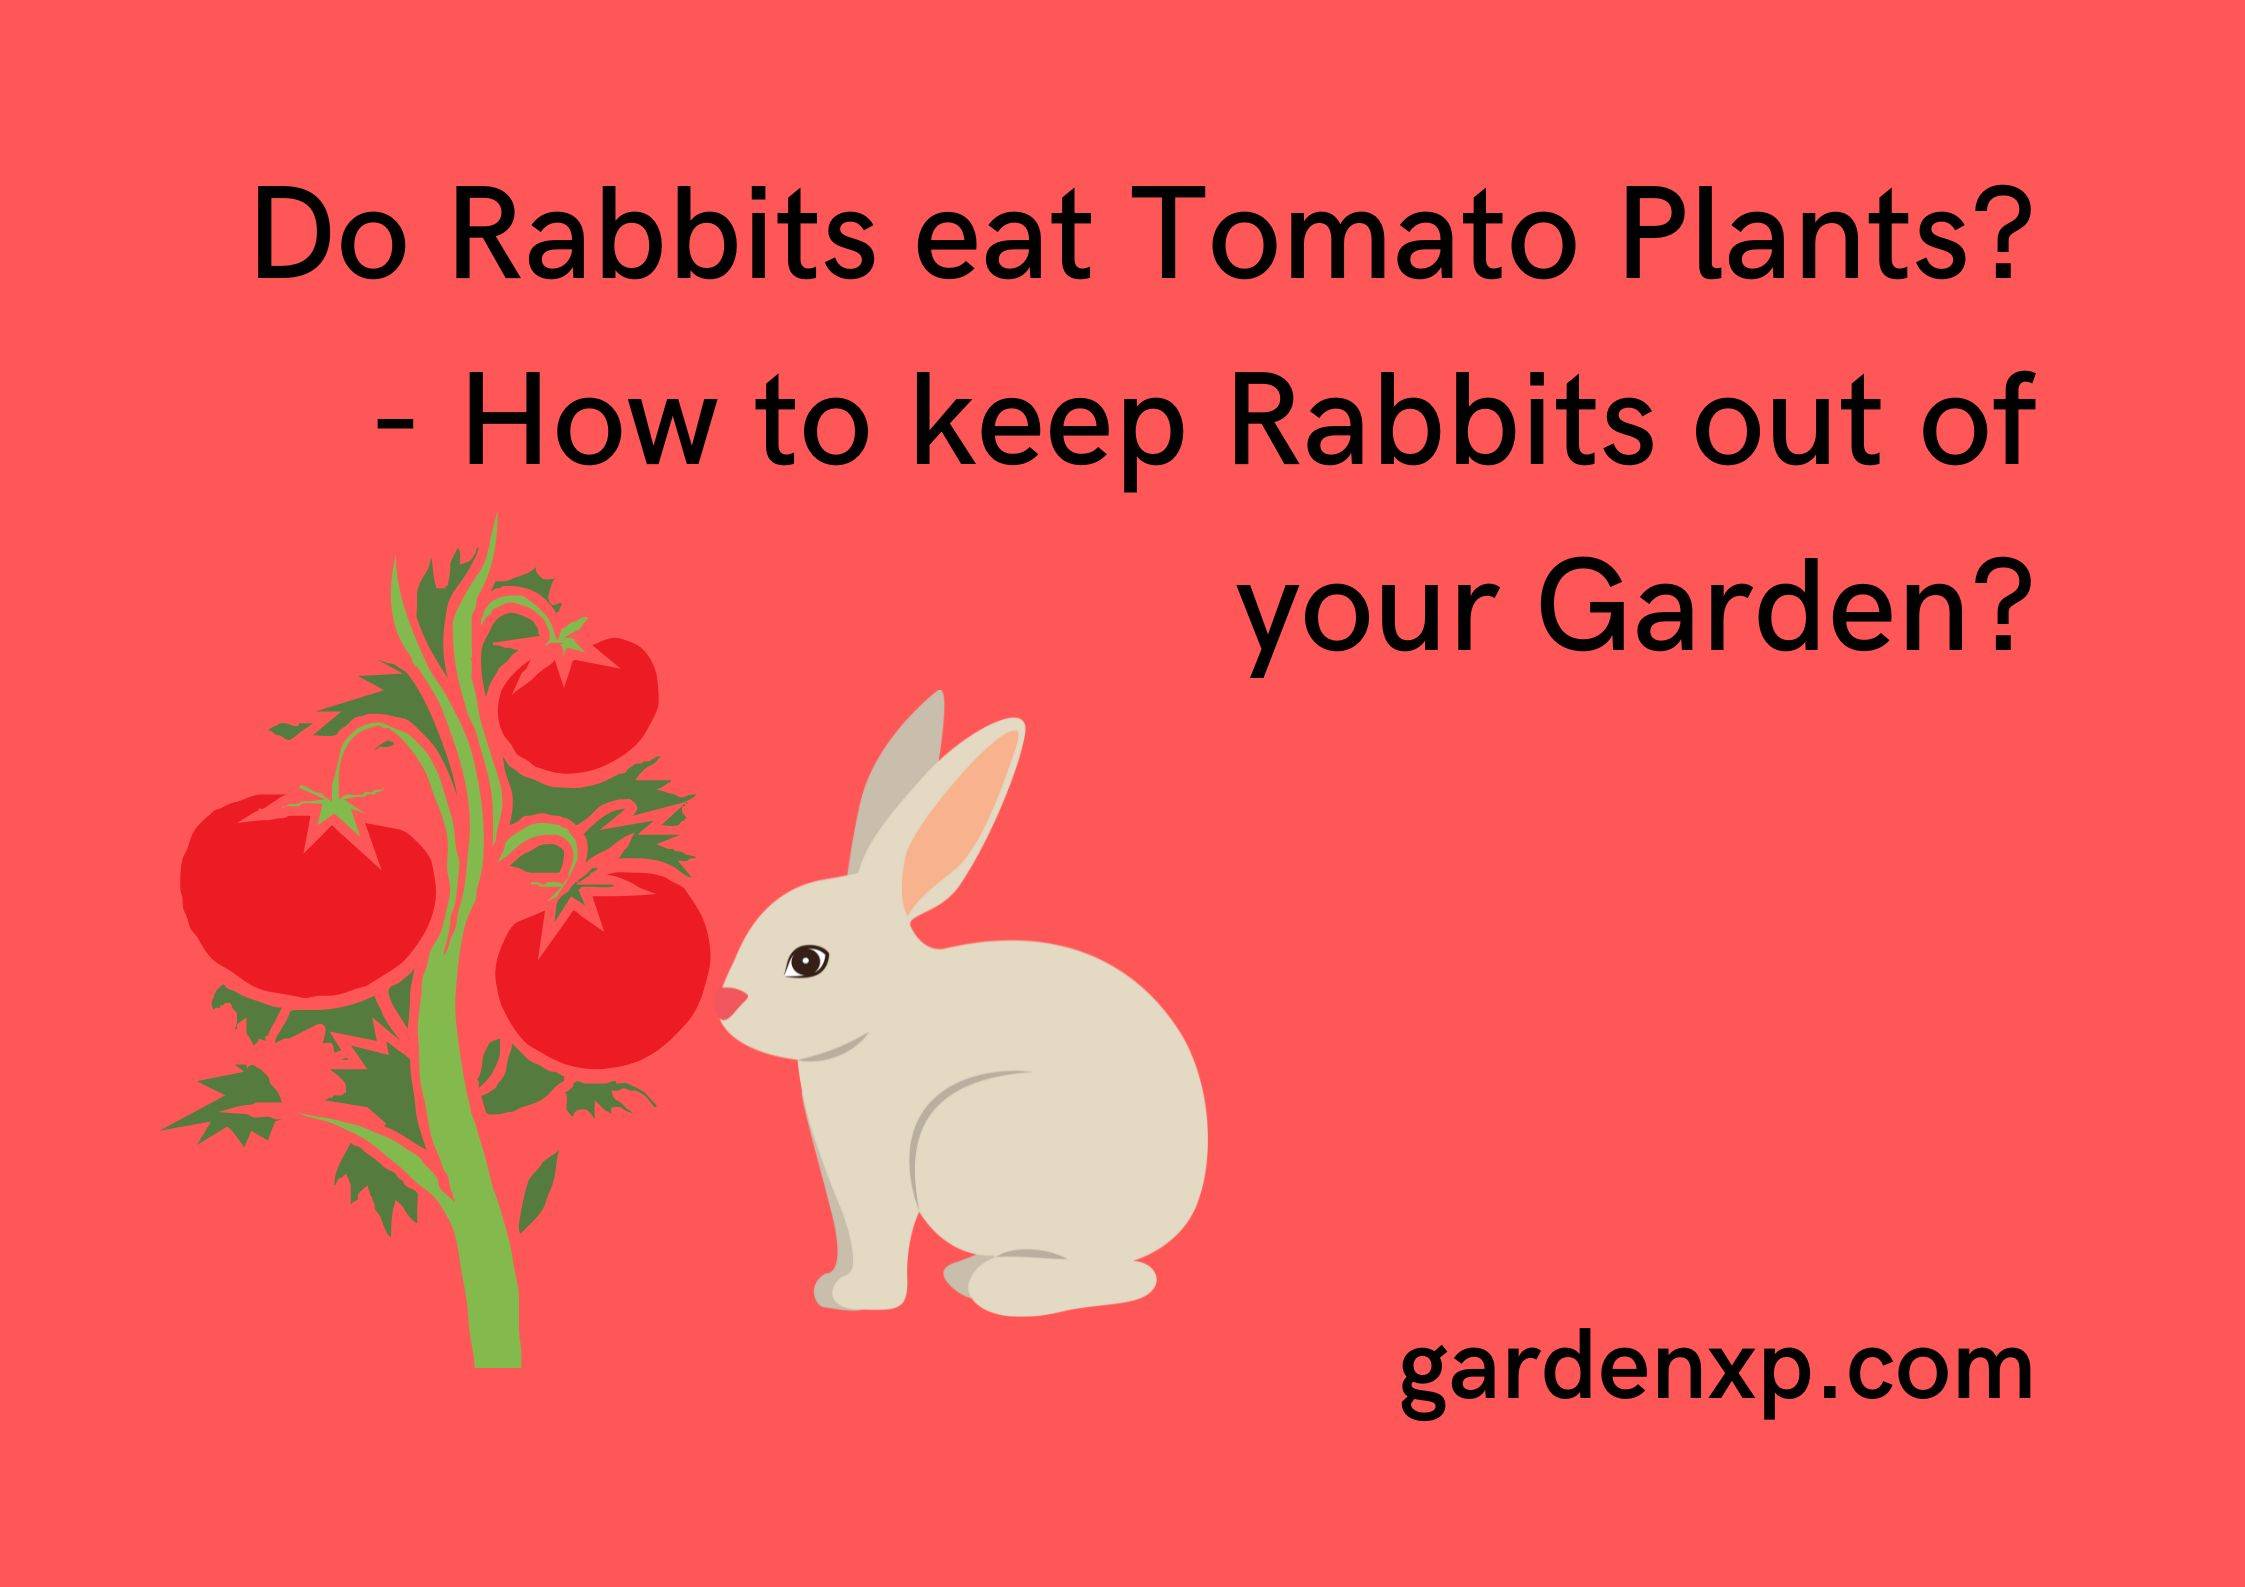 Do Rabbits eat Tomato Plants? - How to keep Rabbits out of your Garden?